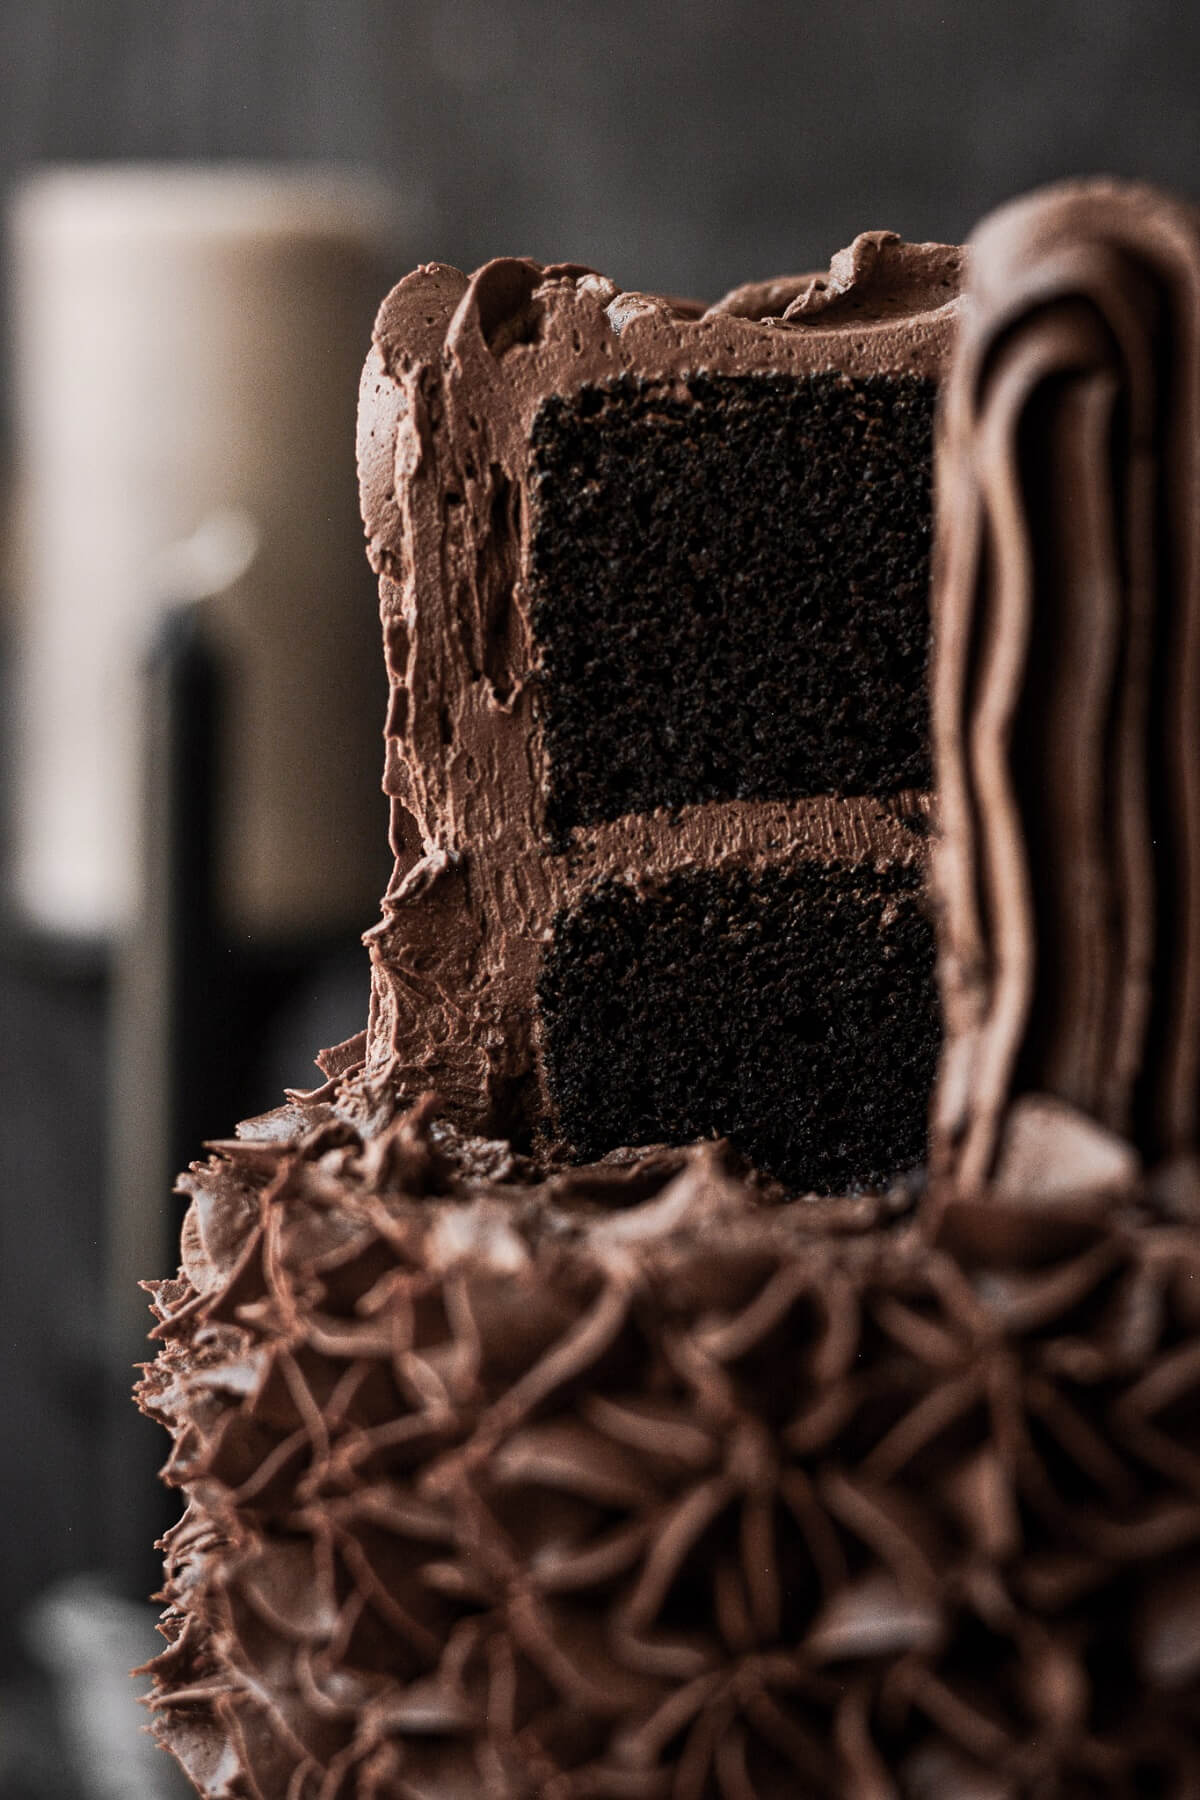 Double chocolate cake with a slice cut.